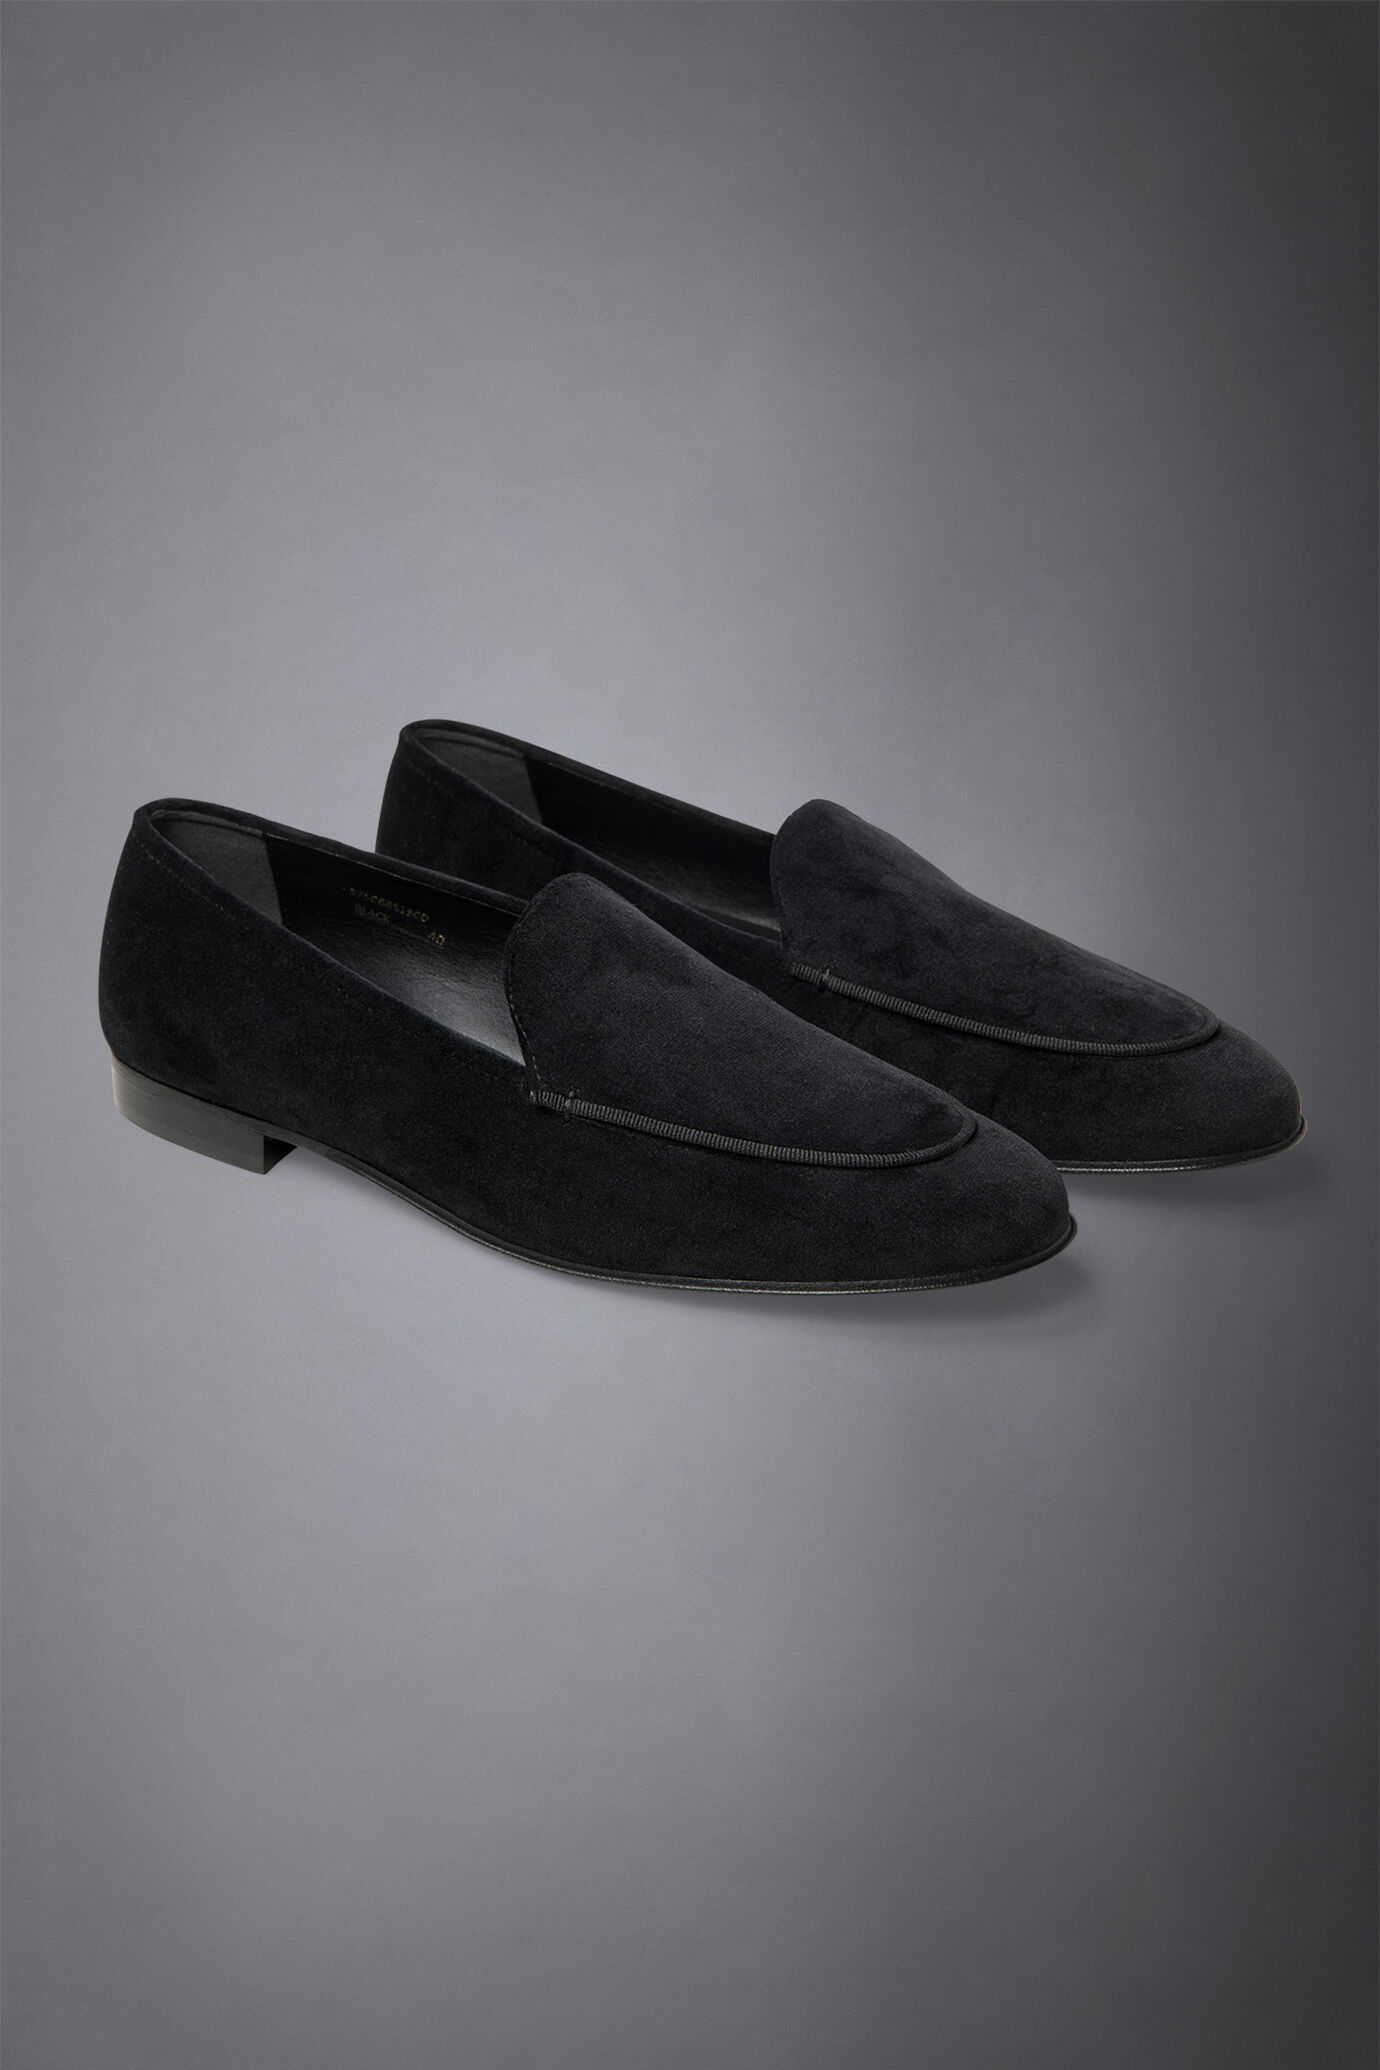 Women's classic velvet loafer with thunit sole